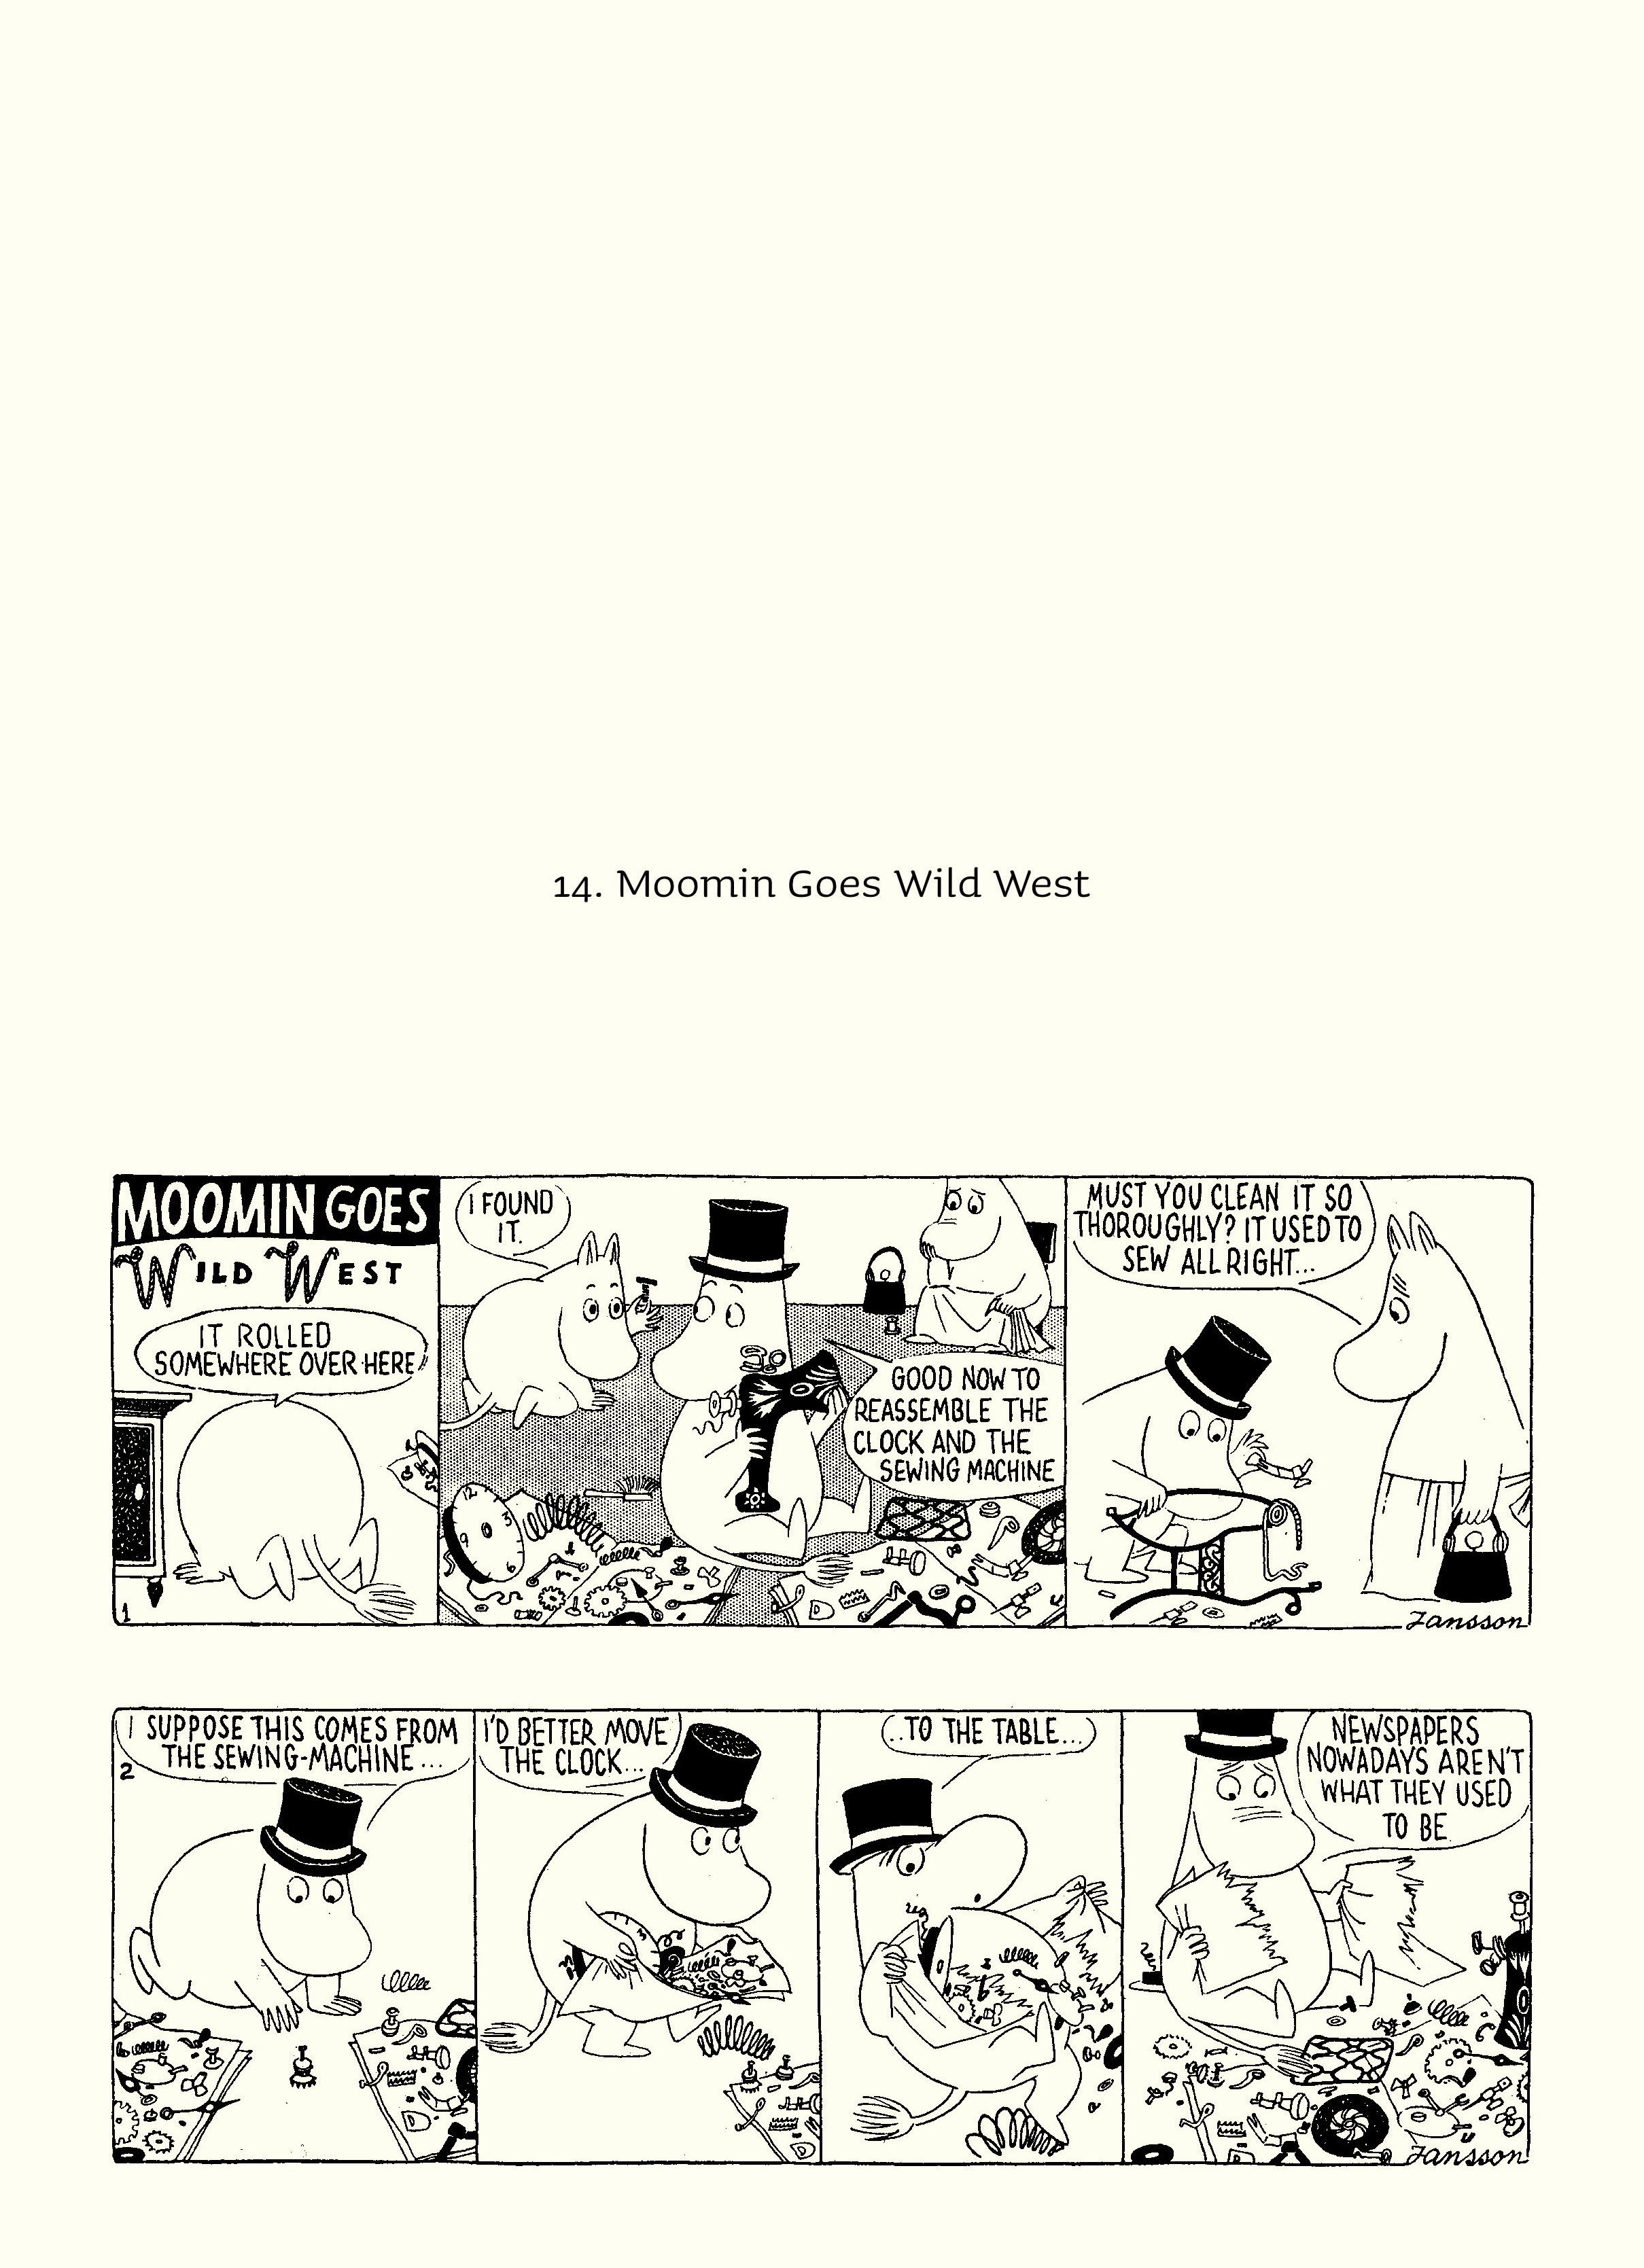 Read online Moomin: The Complete Tove Jansson Comic Strip comic -  Issue # TPB 4 - 6